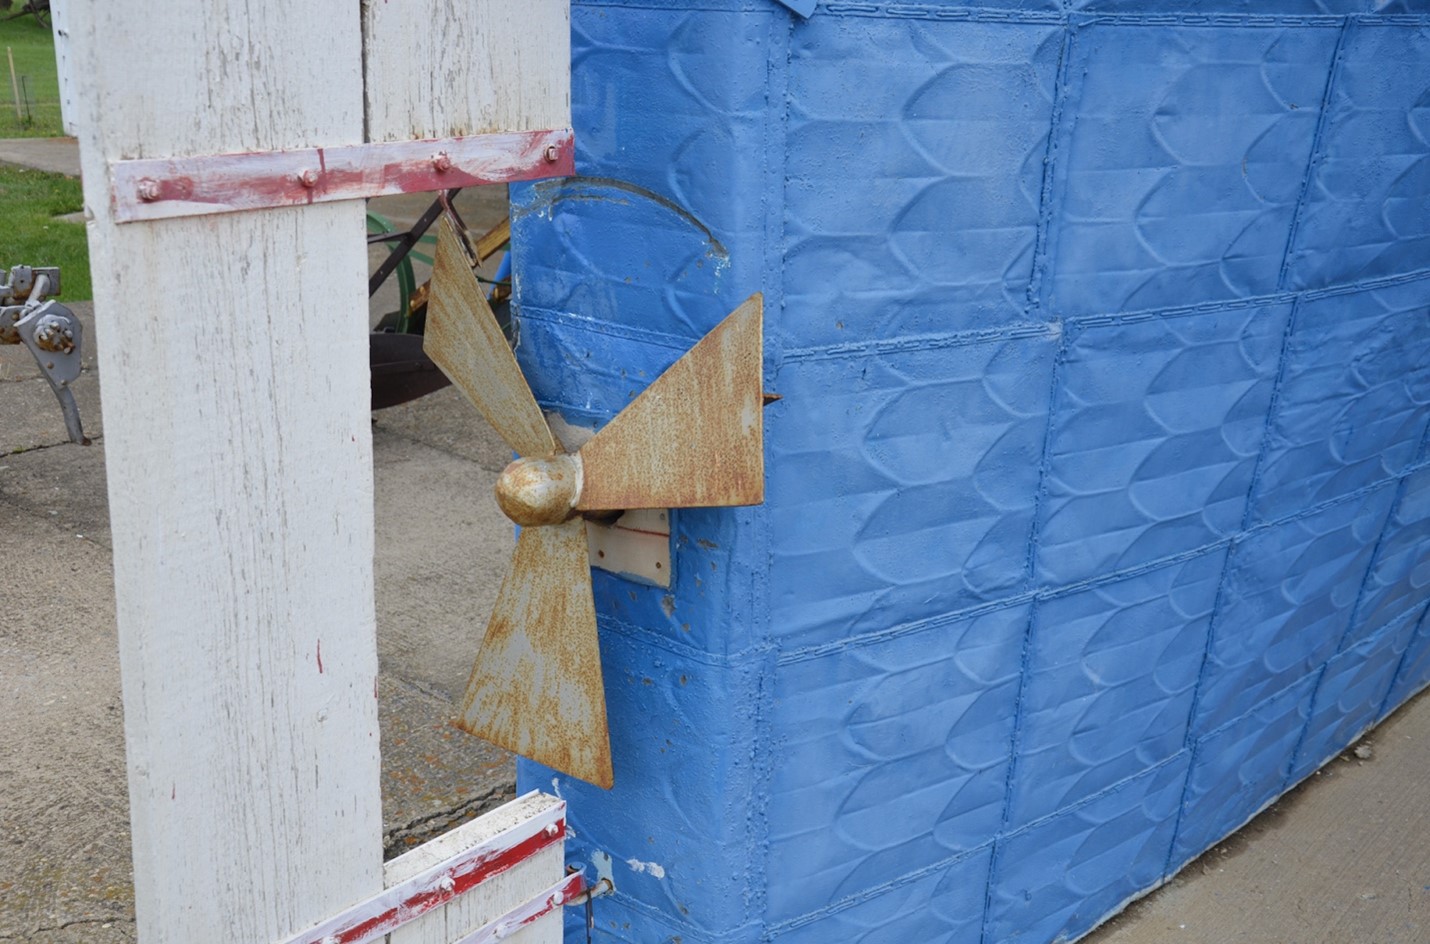 Pictured is a photo of part of the lower royal blue part of the Sukanen ship. The ship is made of some kind of metal which is arranged in squares and probably welded together. Within each square is a pattern of almost feather-shaped embossing or something similar. The ship sits on its concrete base and attached to the ship is a small, rusted propeller, previously silver or maybe white in colour. Protruding behind the propeller is a white wooden rectangle, with a cutout to make room for the propellar; it may be a rudder, or possibly protection for the propellar. The boards are attached to each other with red pieces of metal with rivets or screws and the whole thing is attached to the blue part of the ship at least at the bottom and possible further up, out of frame. There is a semi-circular scratch on the blue part of the ship that has rusted, where the white wooden piece looks like it has made contact. In the background, a small amount of green grass can be seen.